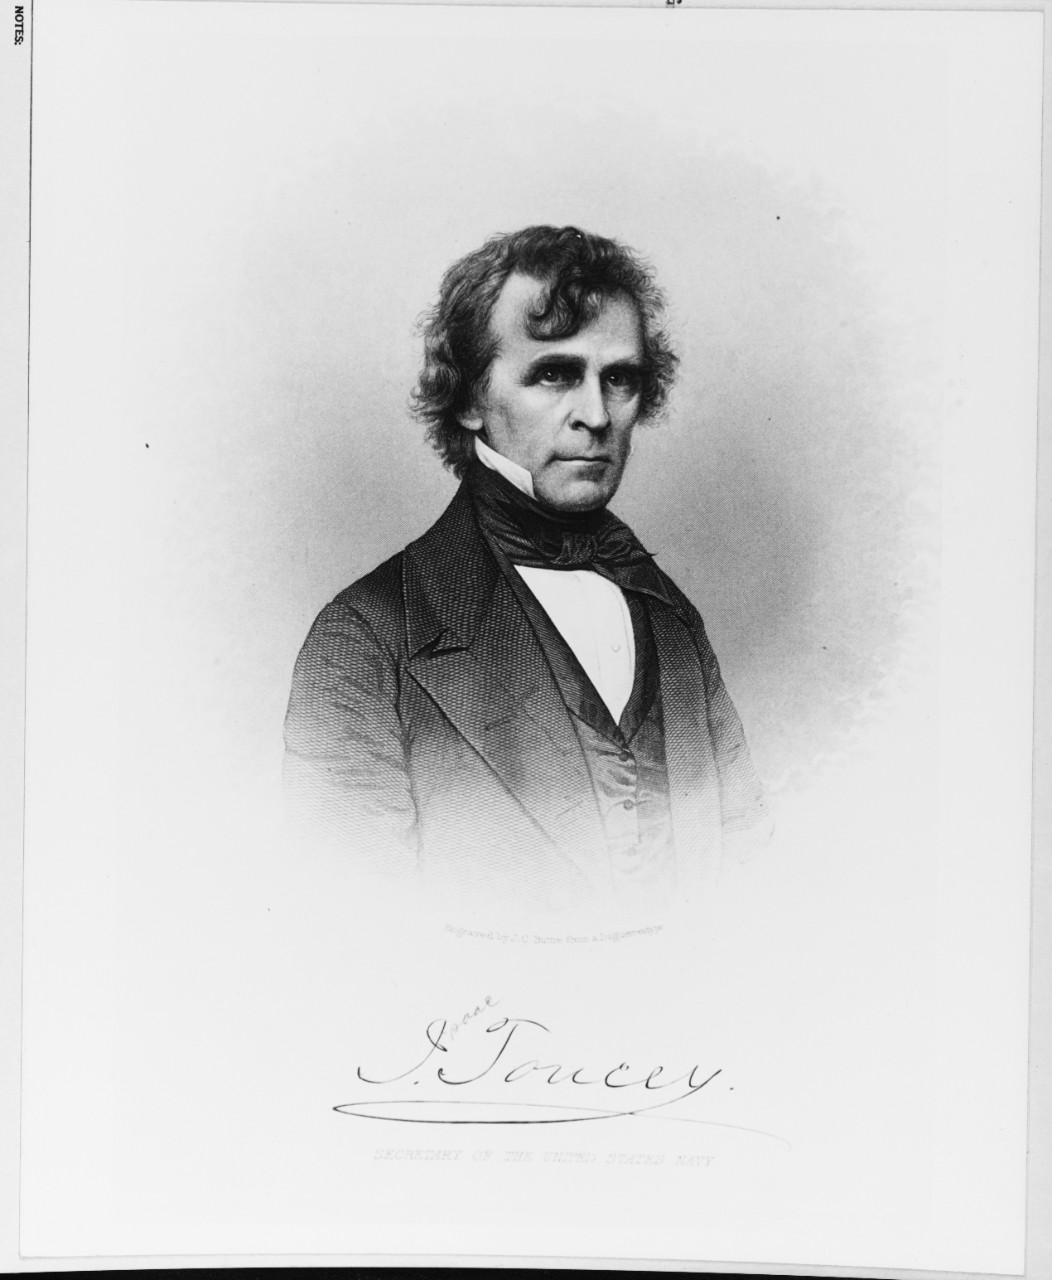 Honorable Isaac Toucey, Secretary of Navy, 7 March 1857 to 6 March 1861.